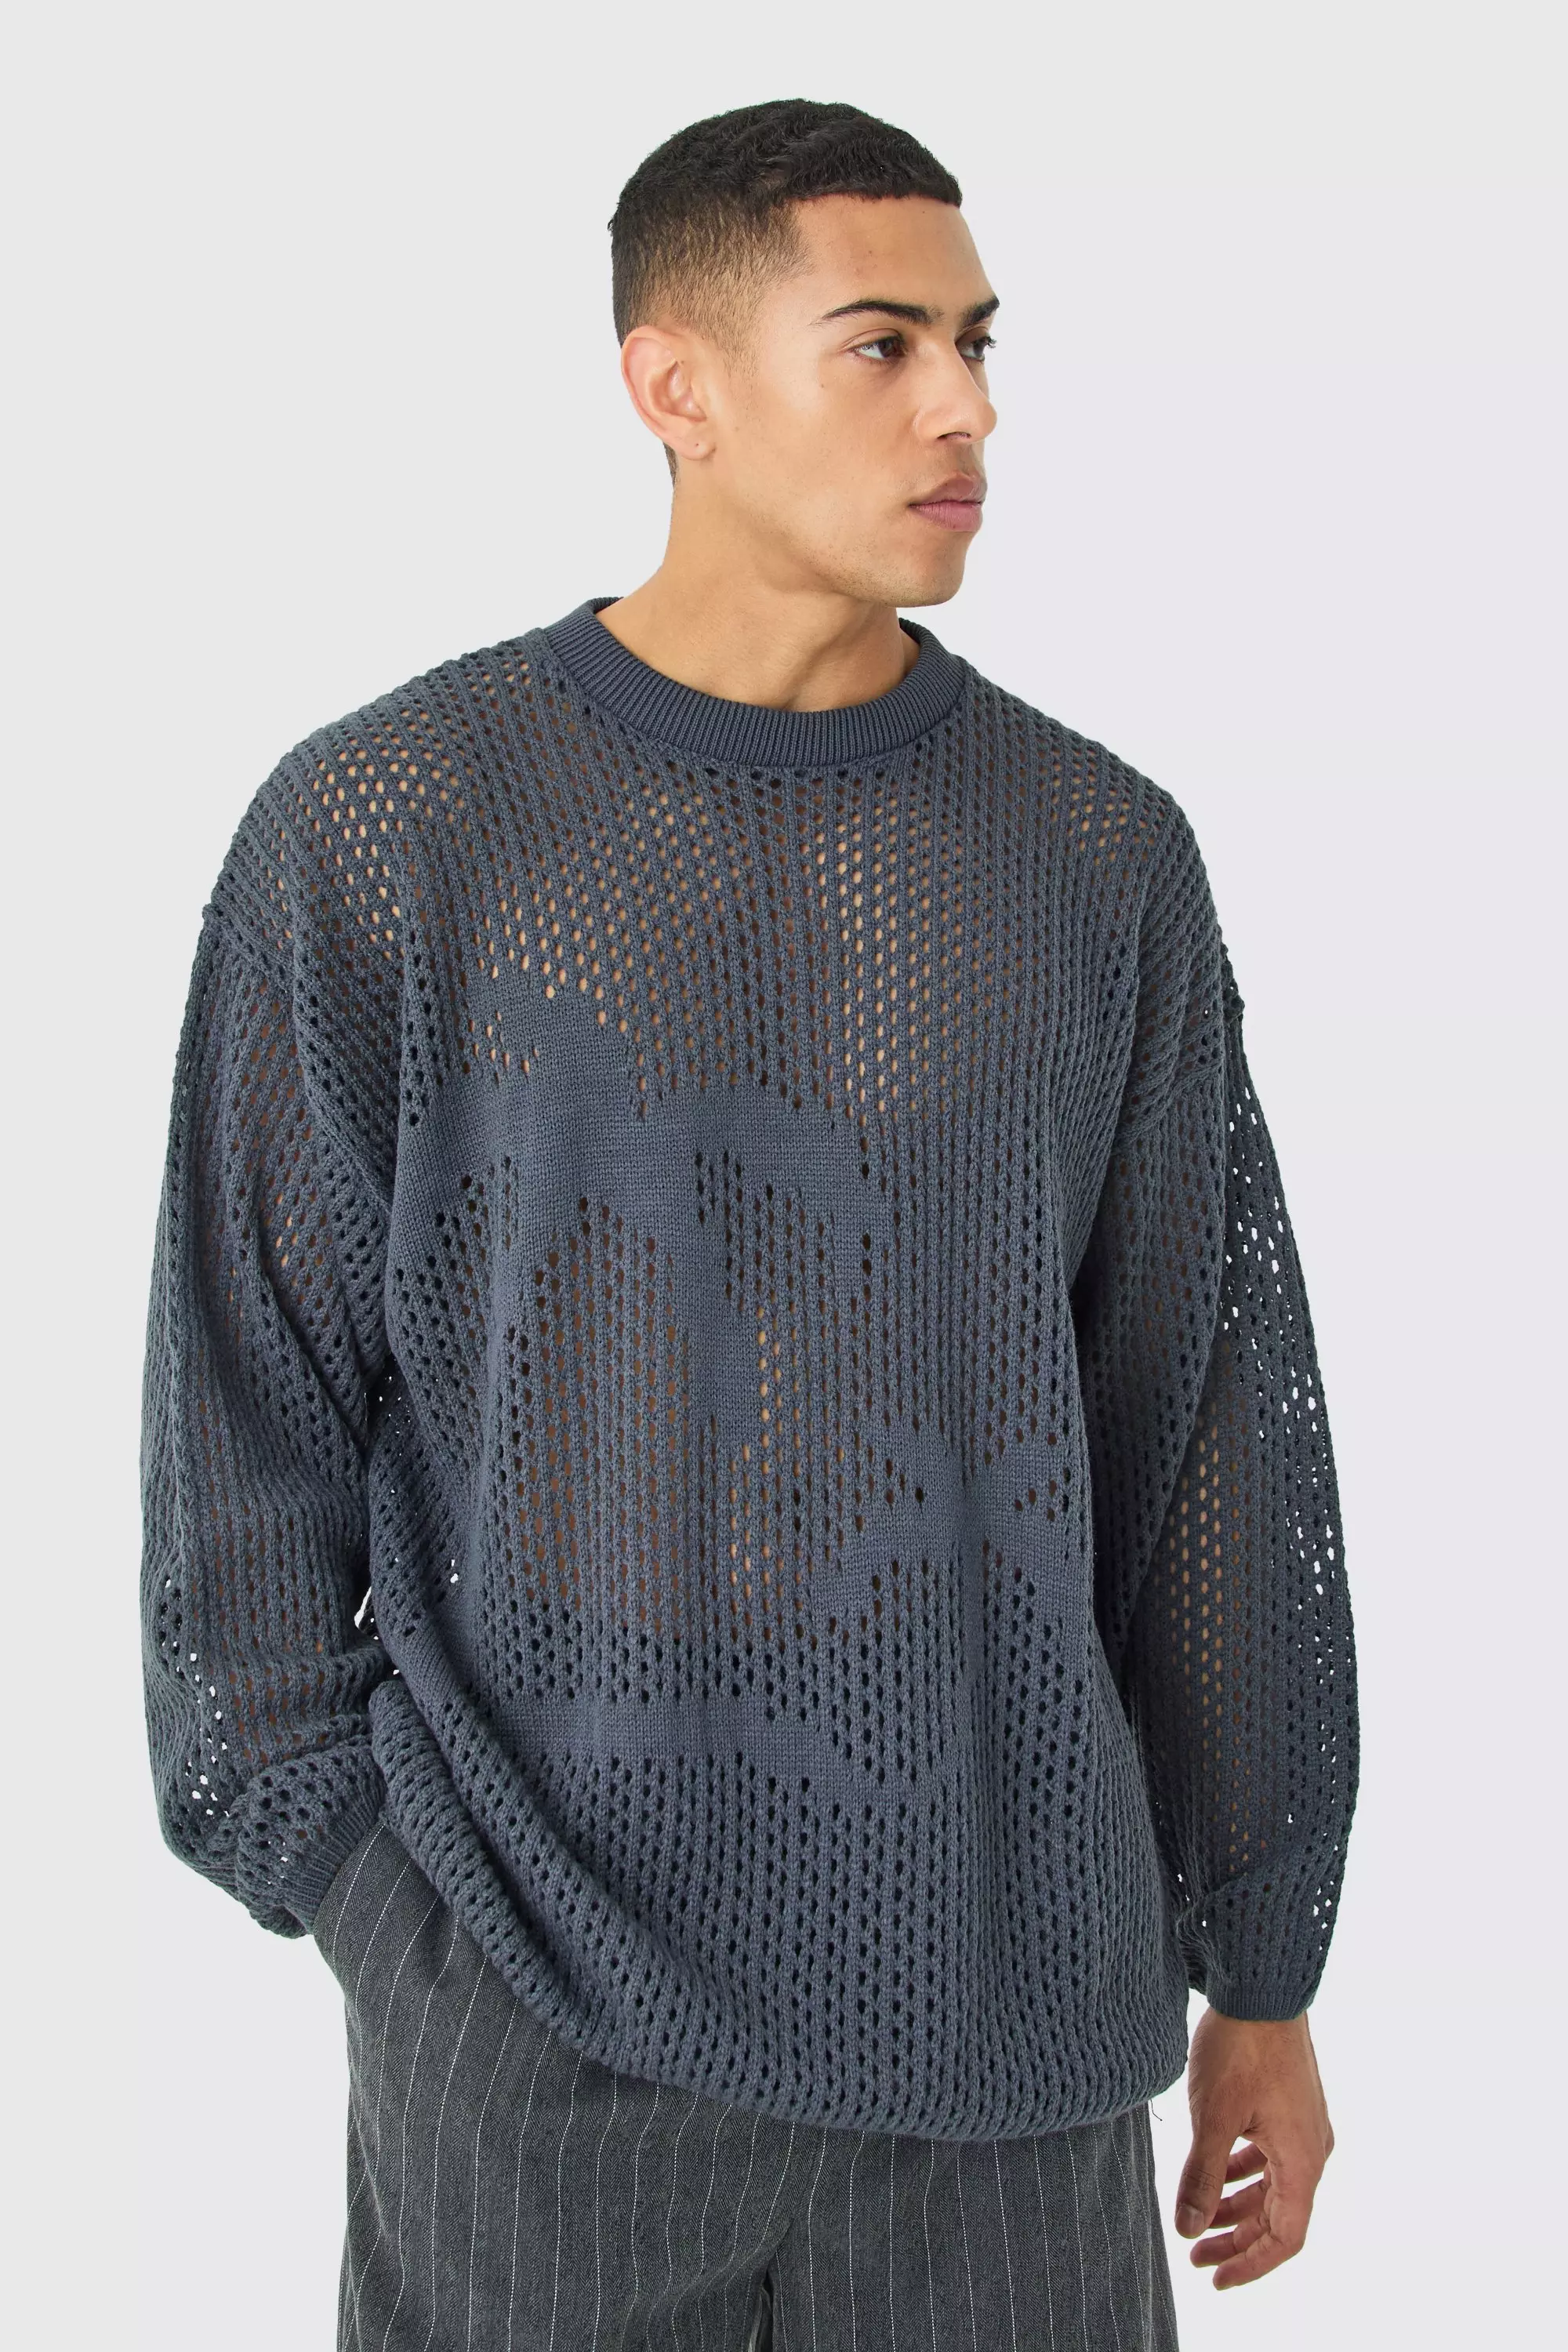 Oversized Open Stitch Palm Knitted Jumper Grey